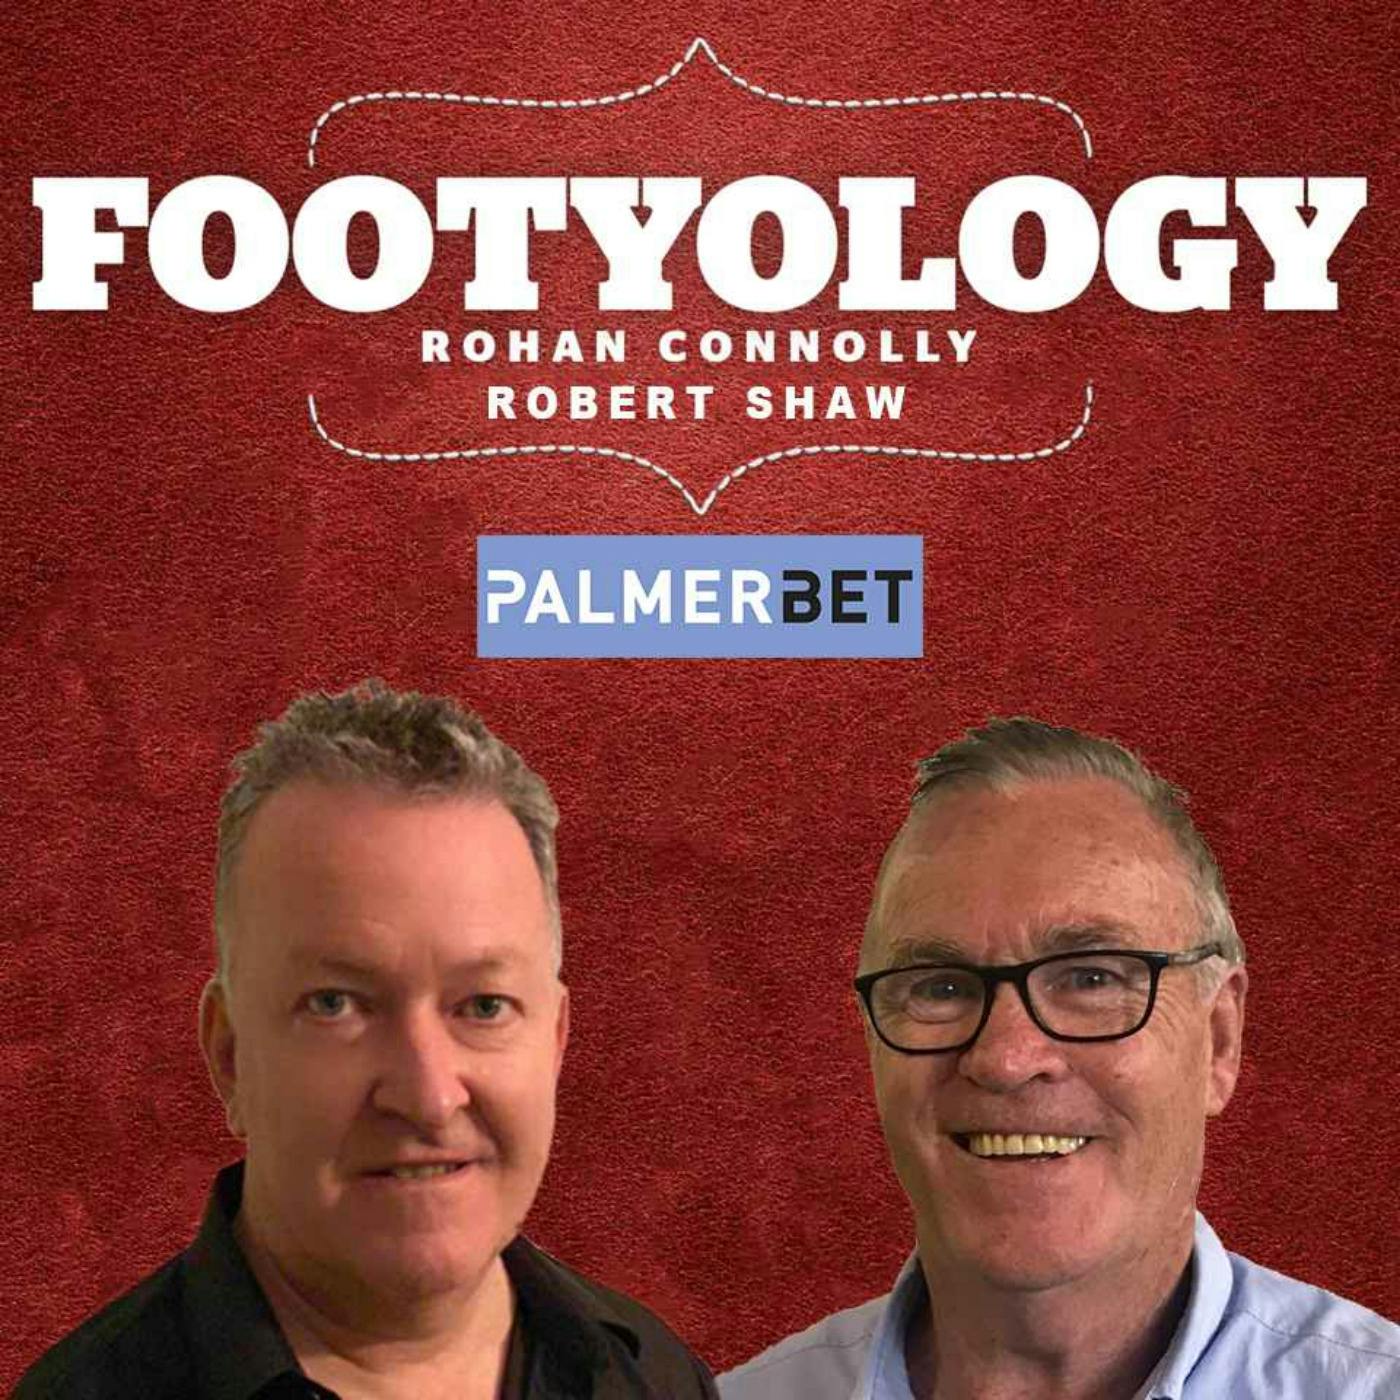 Footyology Podcast - May 25th 2022